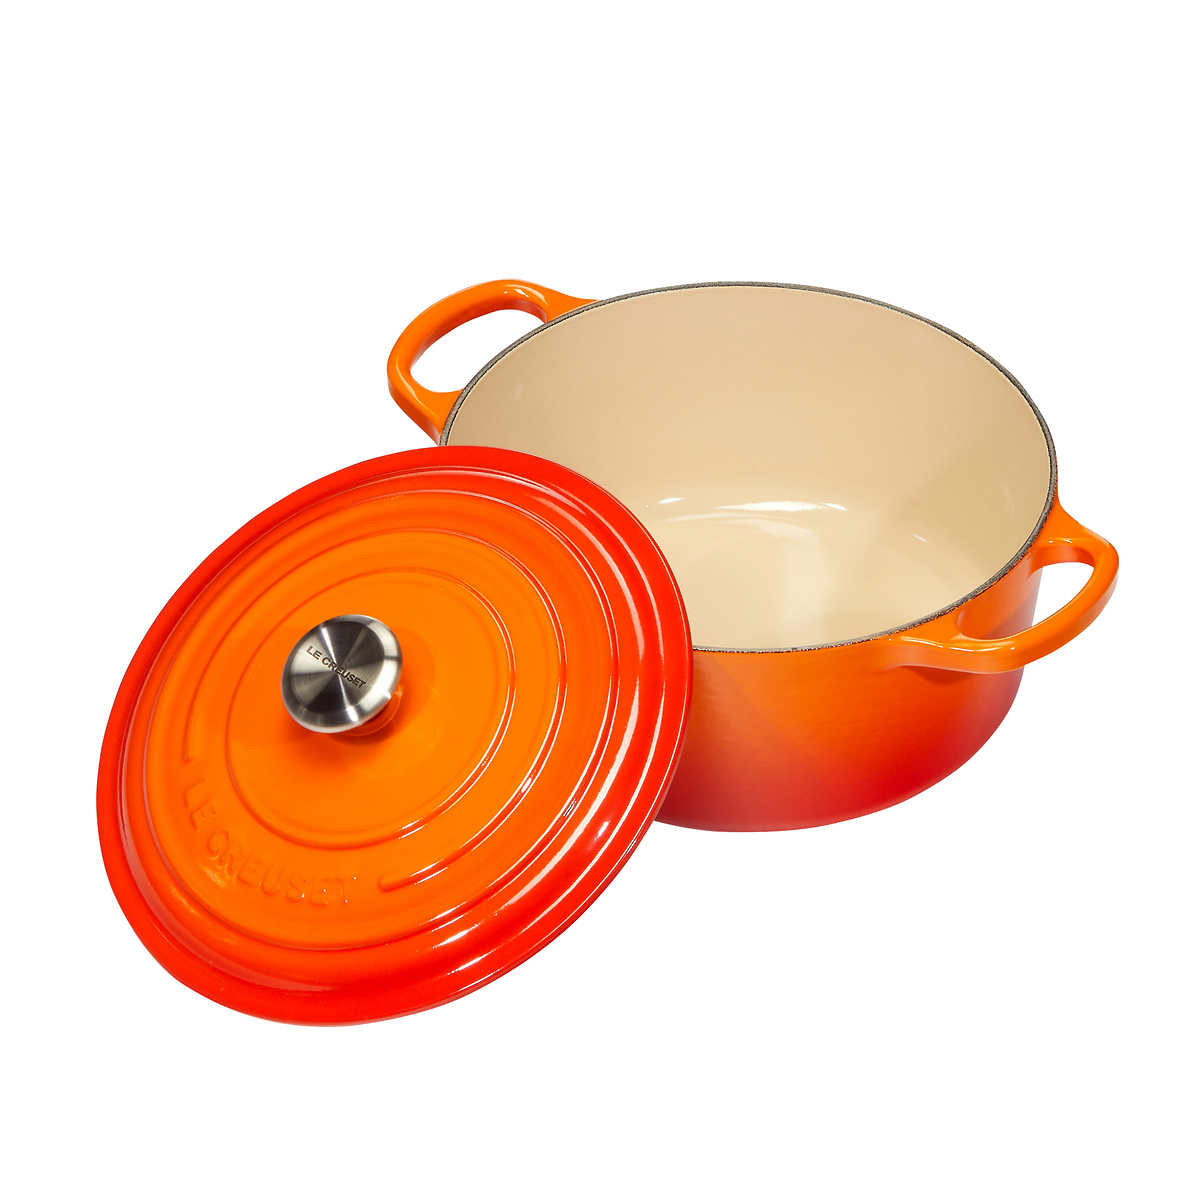 Le Creuset Signature 3.5-Quart Round Enameled Cast Iron Dutch Oven with  Stainless Steel